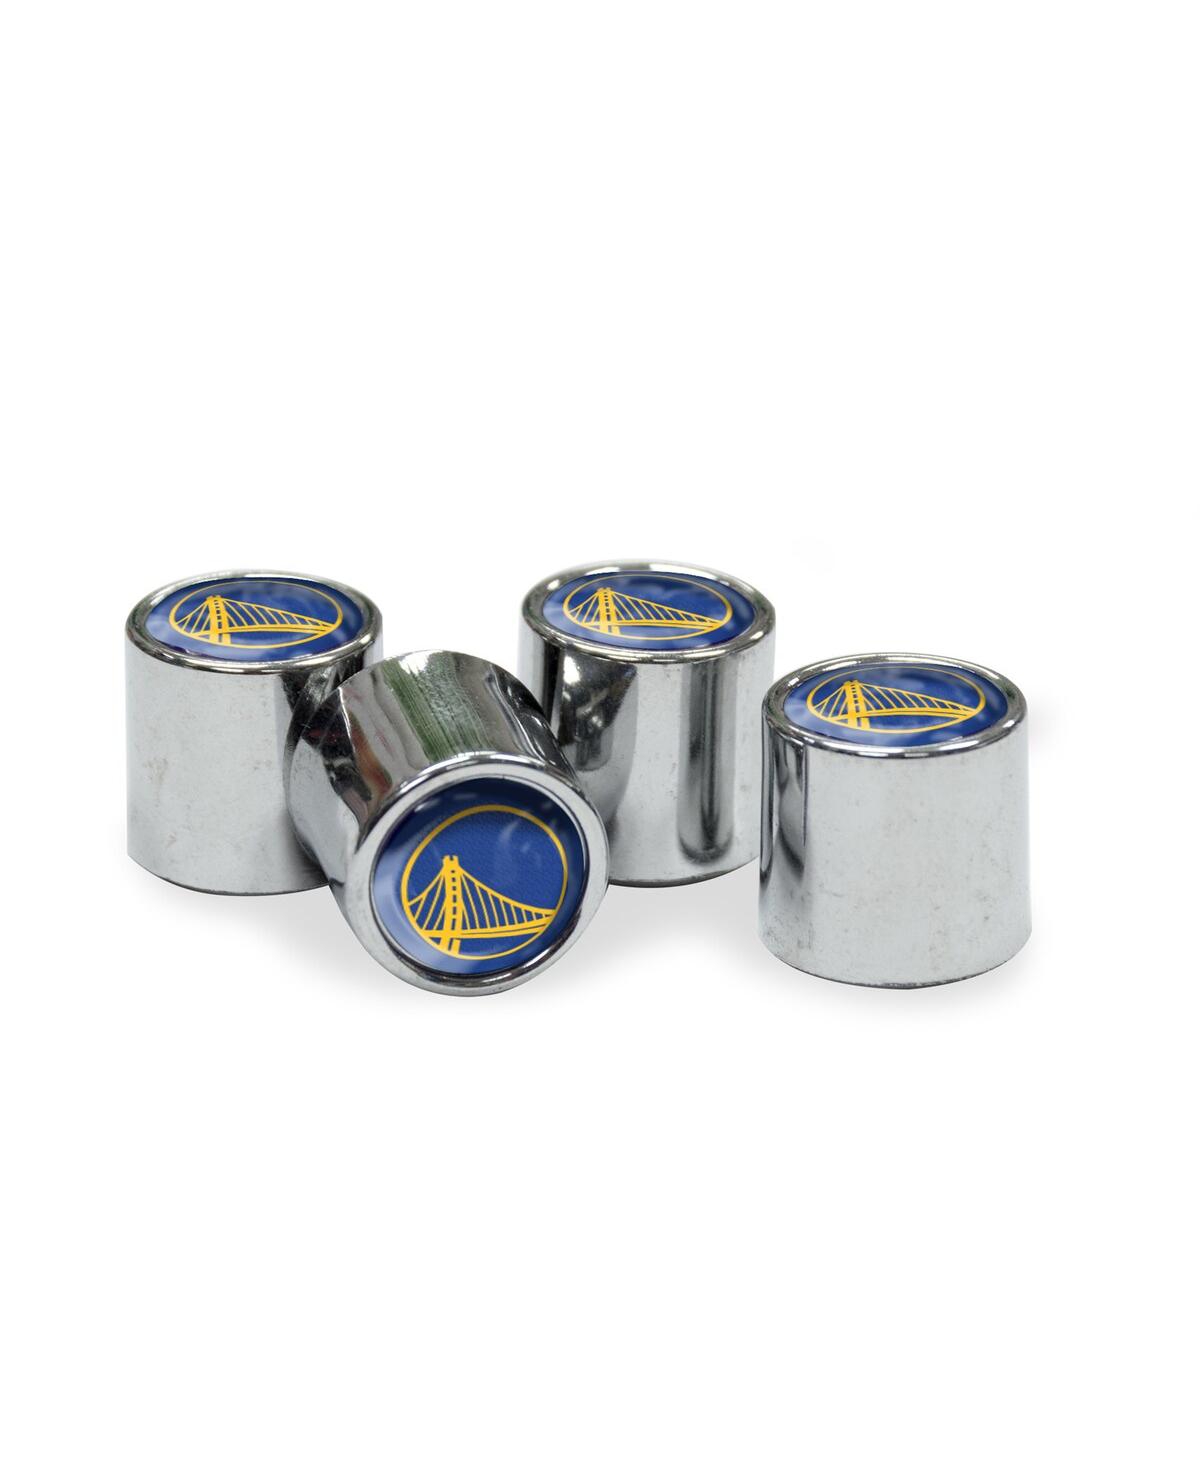 Golden State Warriors 4-Pack Valve Stem Covers Set - Silver-Tone